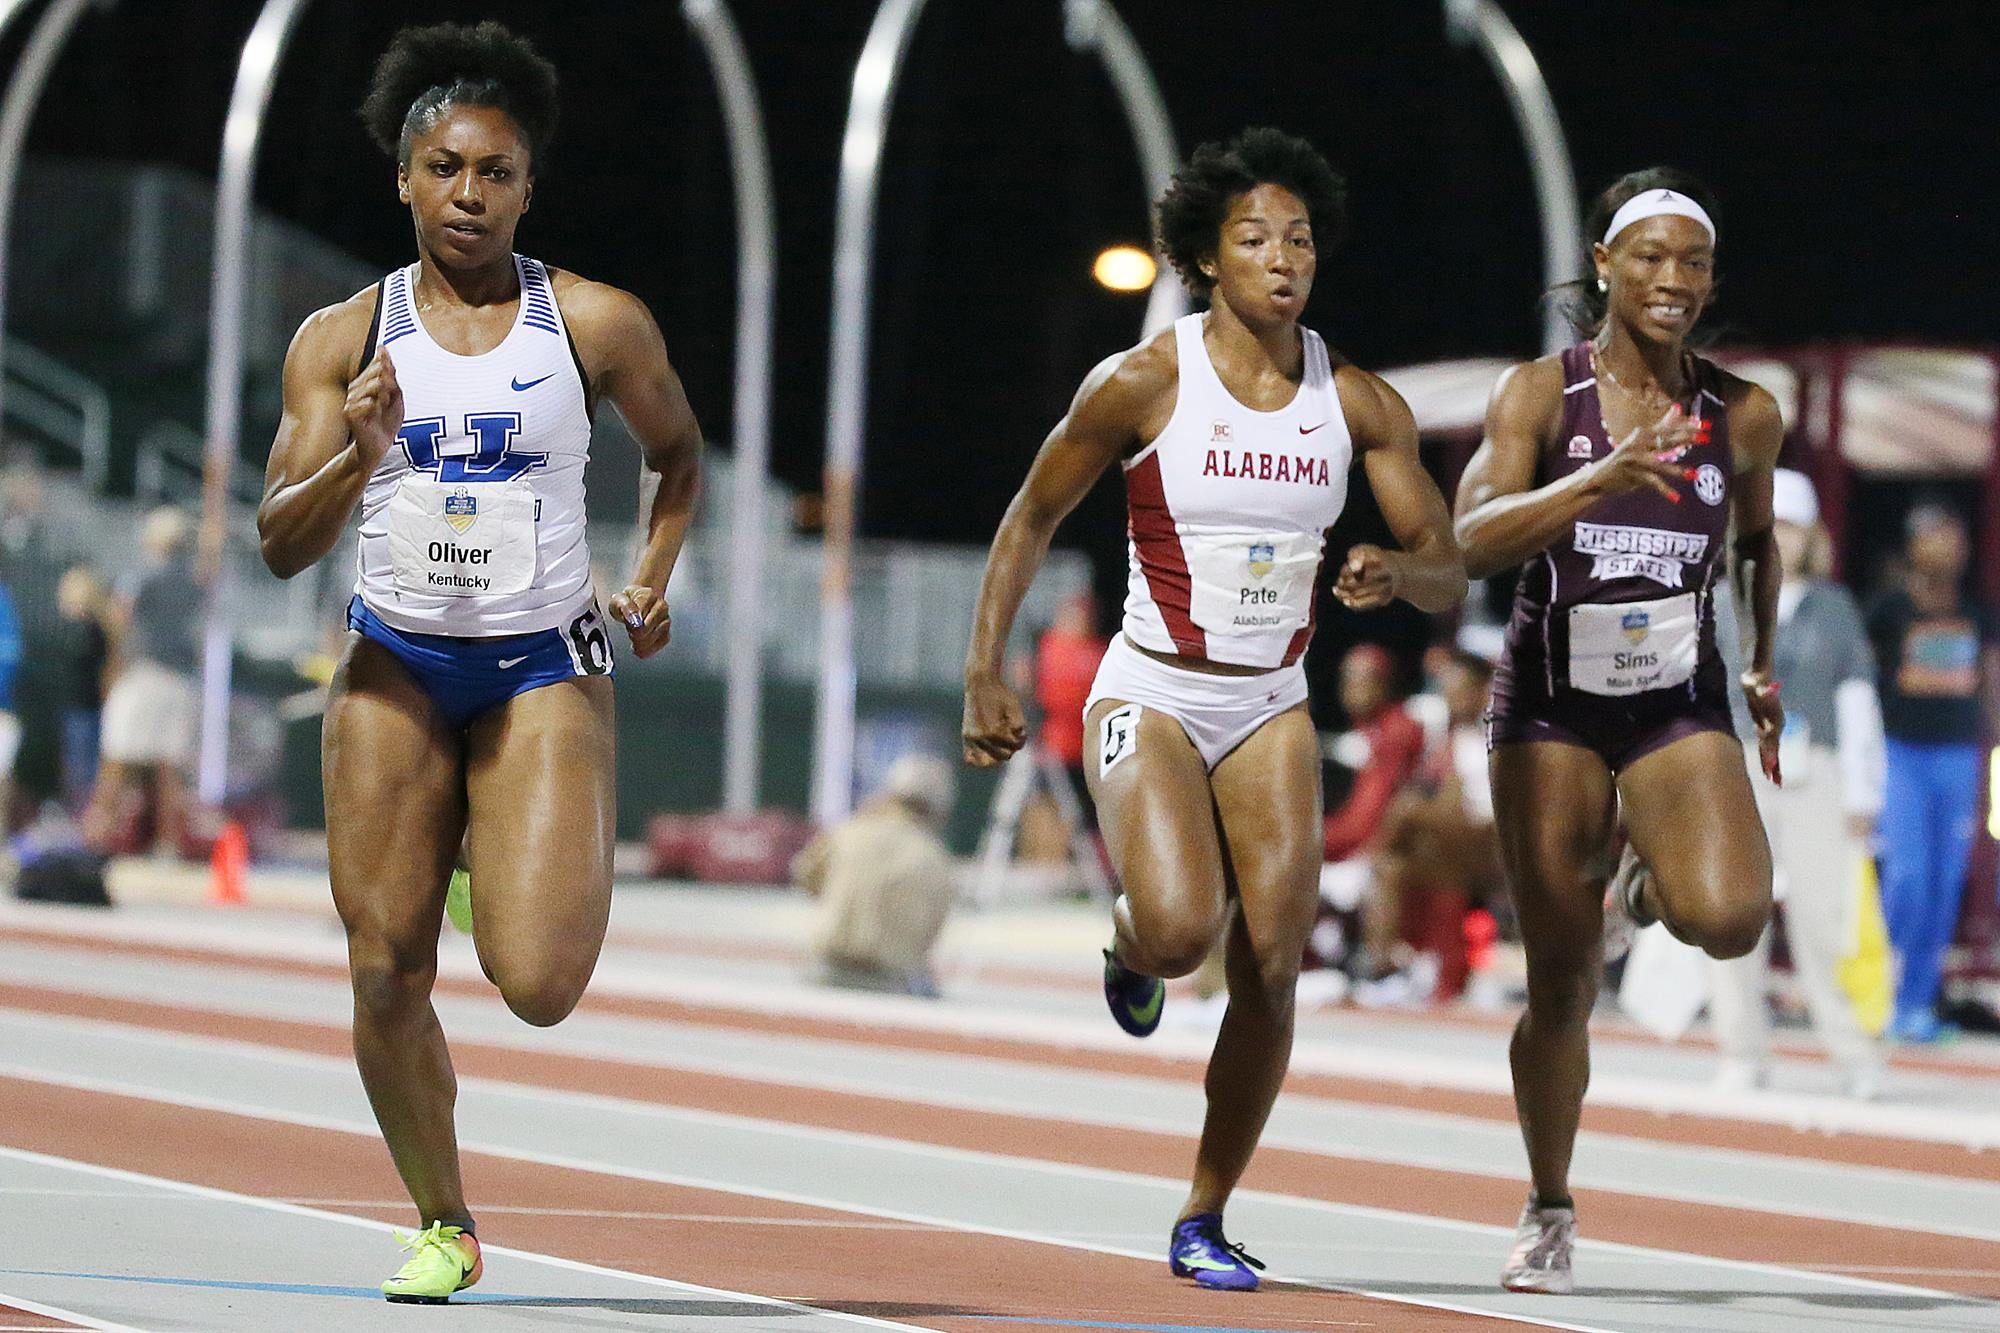 Wildcat Javianne Oliver Qualifies for Olympic Semifinals in 100m Dash